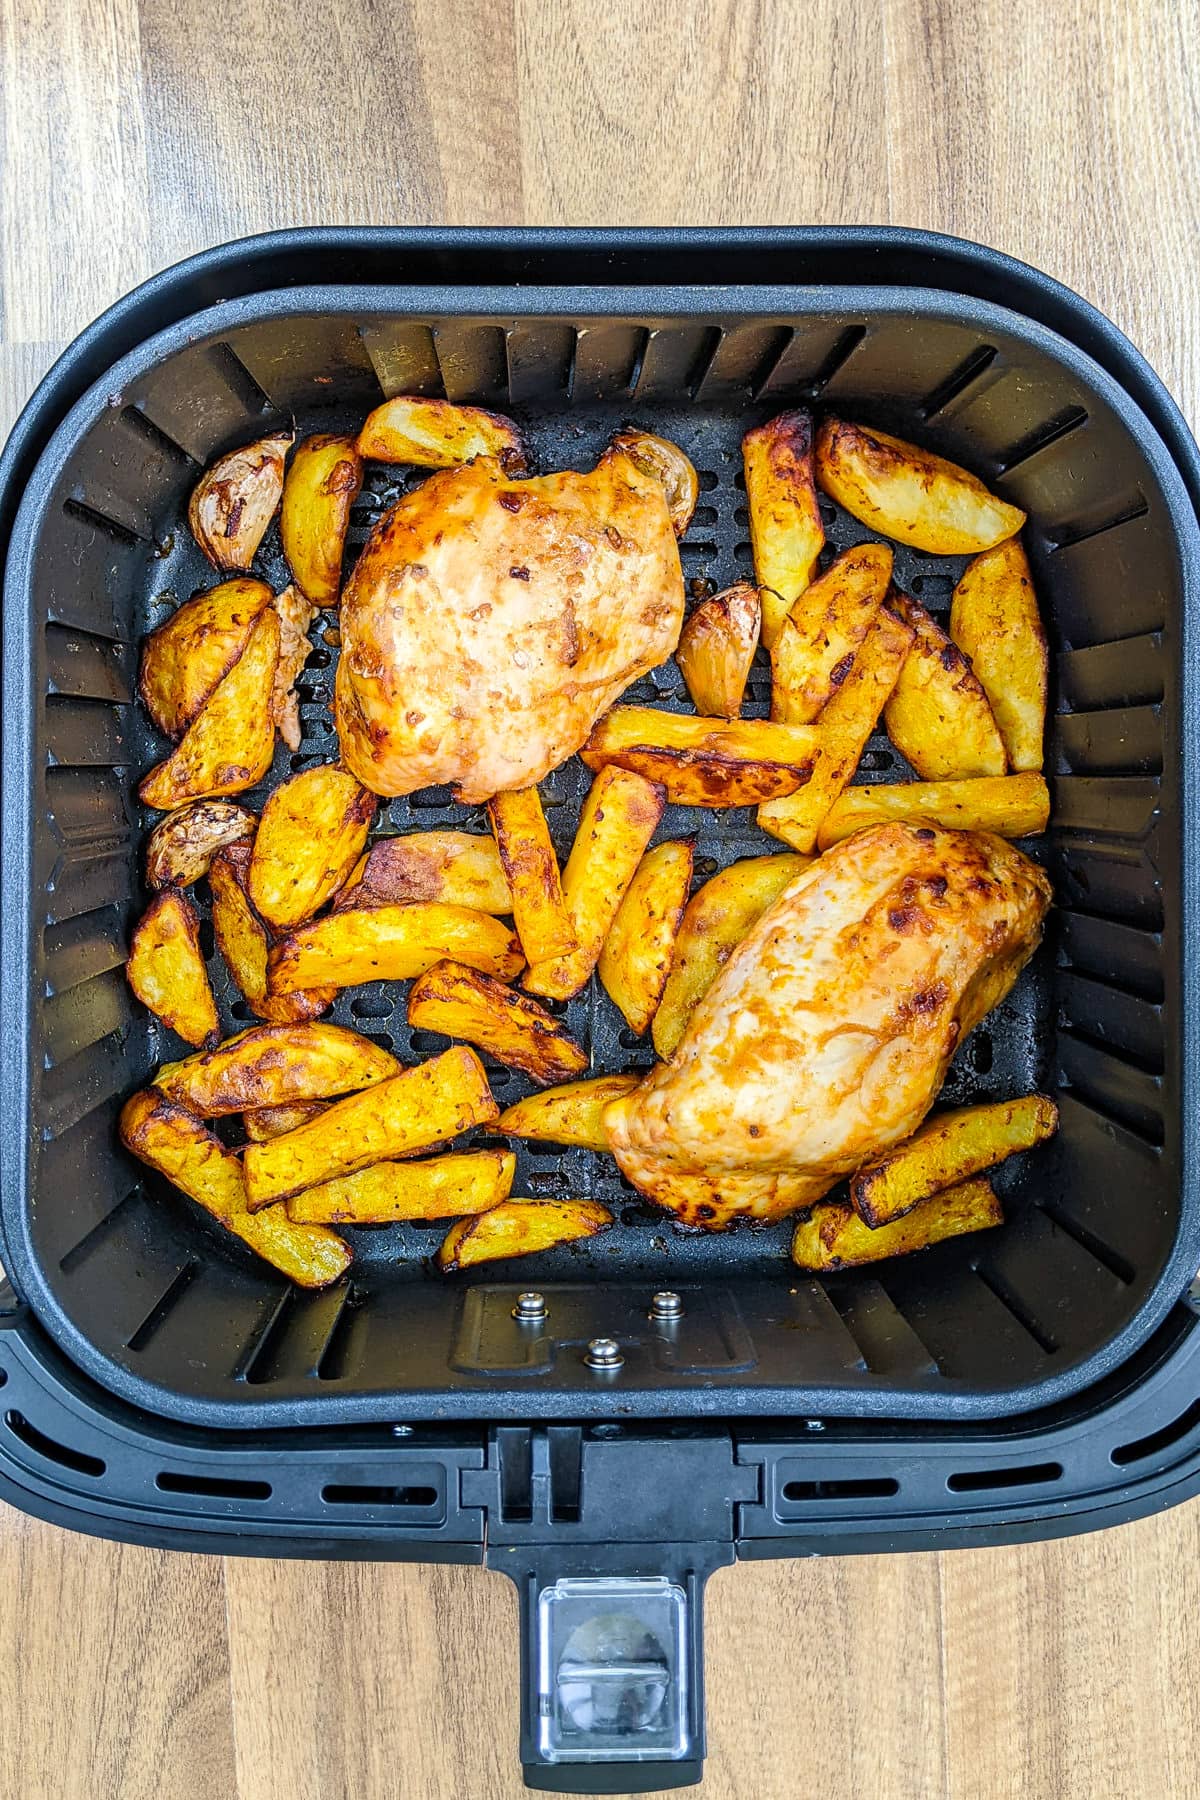 Air fryer basket with chicken breast and potatoes.